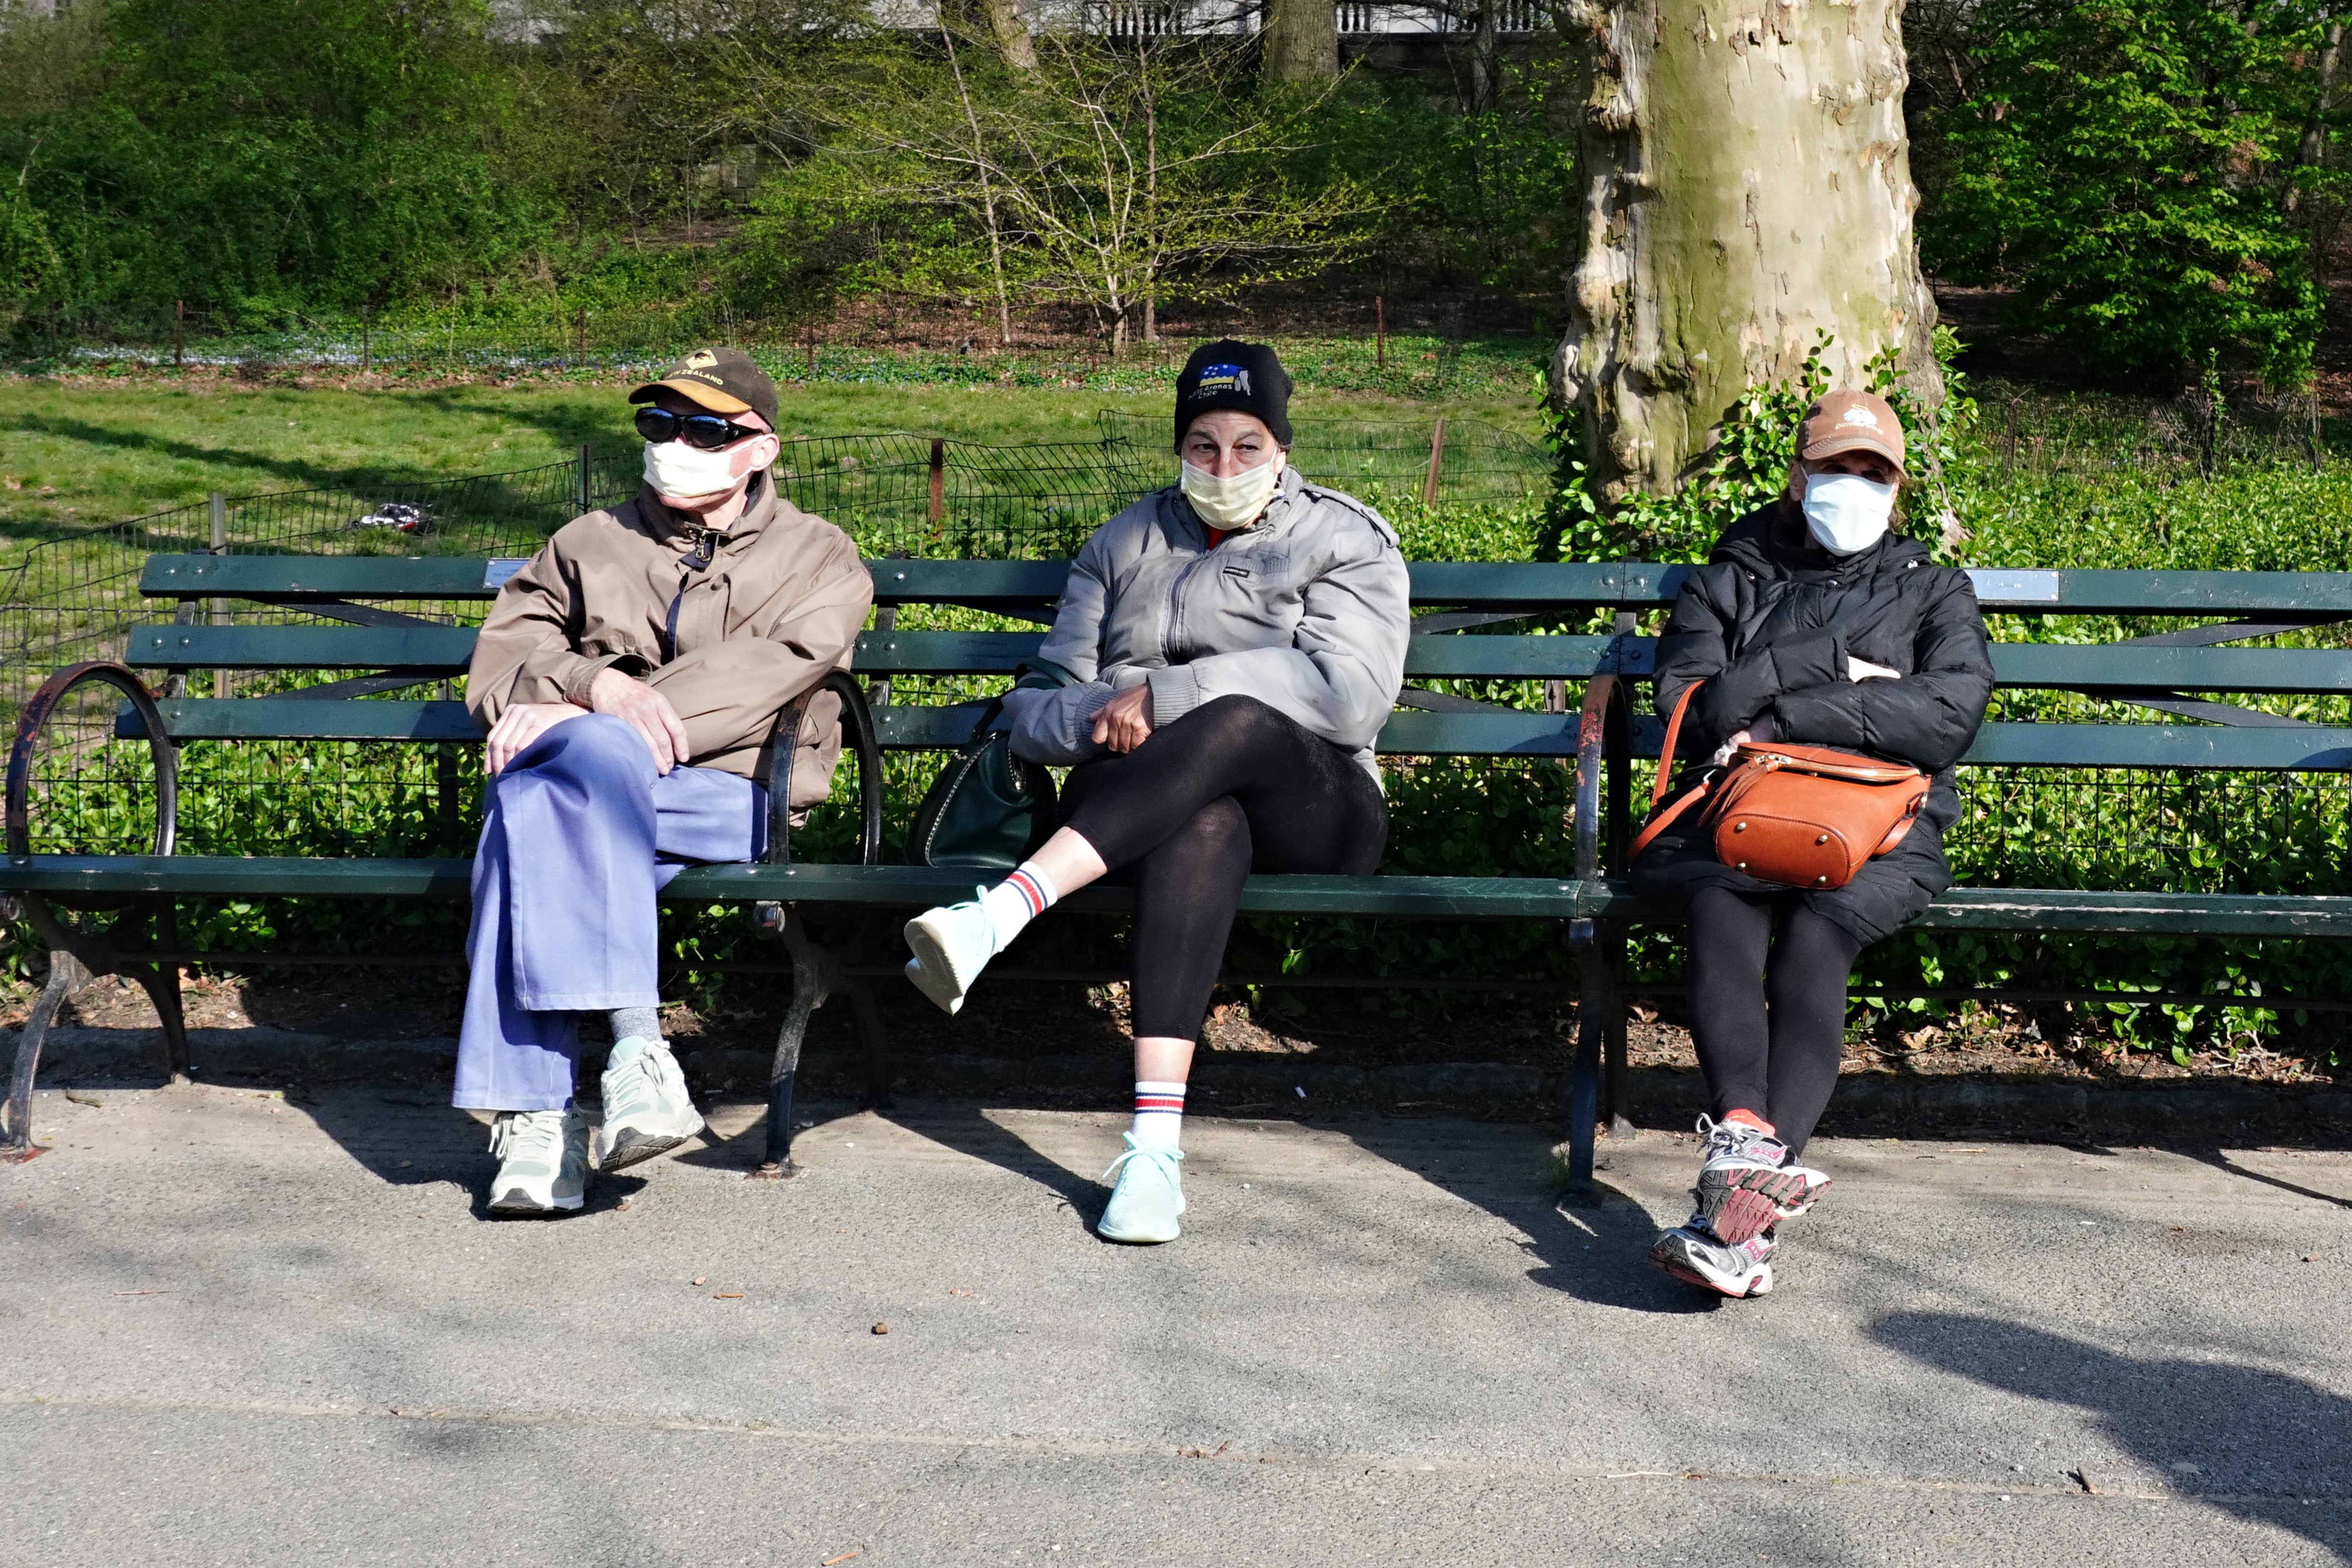 New Yorkers heed advice to wear masks to help control the spread of the coronavirus as they sit in Central Park in New York City on April 11, 2020. (Cindy Ord—Getty Images)